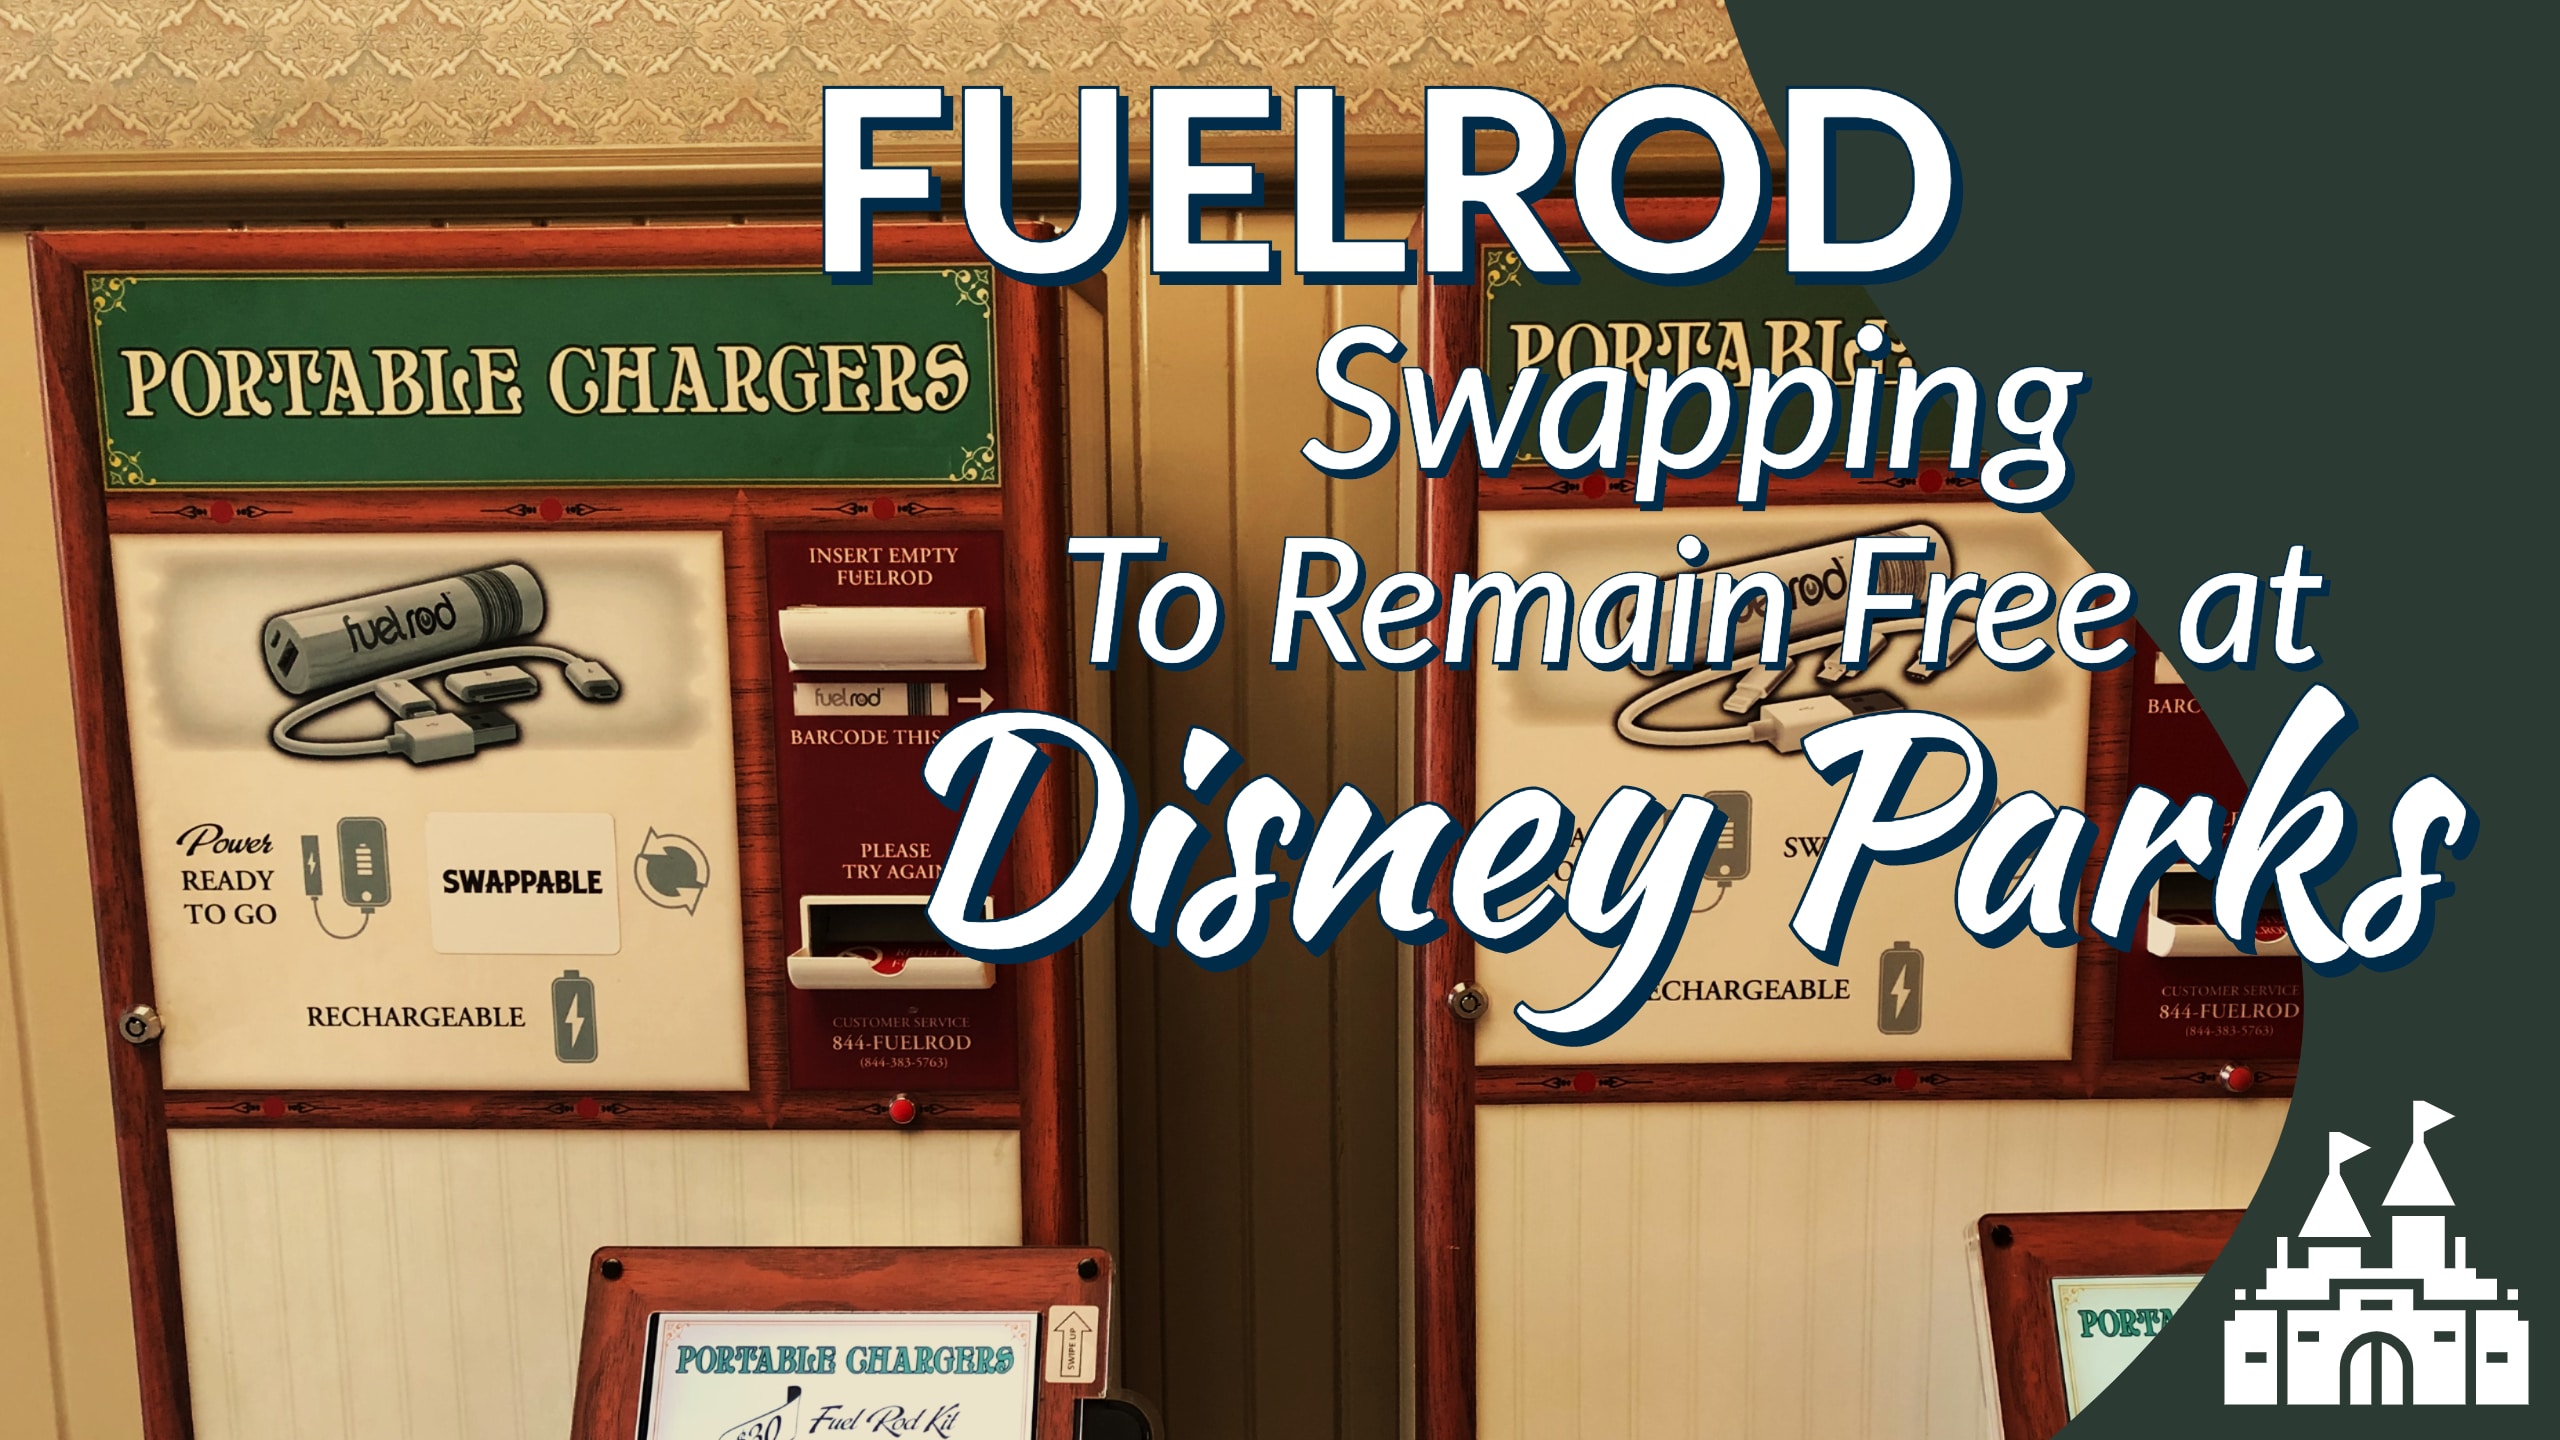 FuelRod Swapping to Remain Free at Disney Parks!